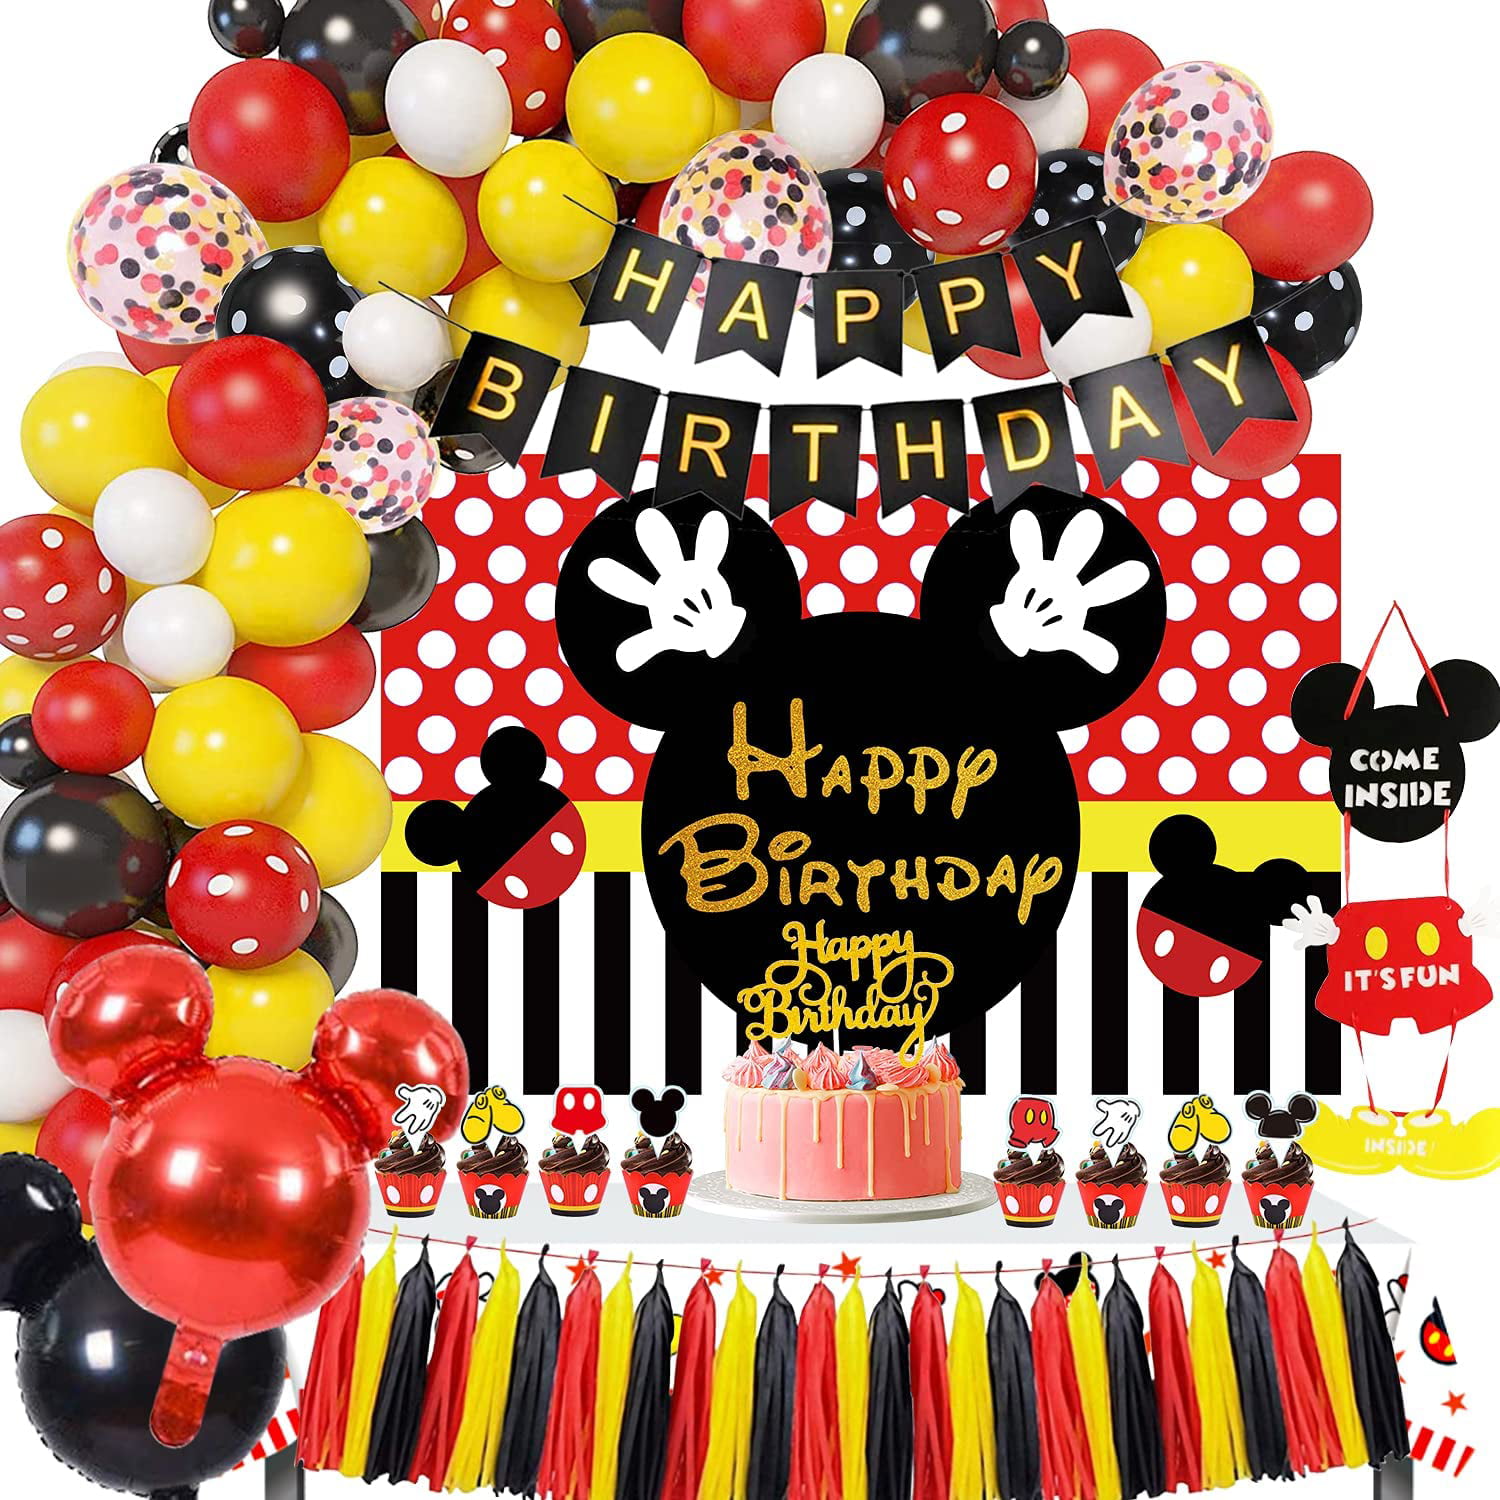 w/ 12 Photo Props MICKEY MOUSE WALL BANNER DECORATING KIT 5pcs Party Supplies 